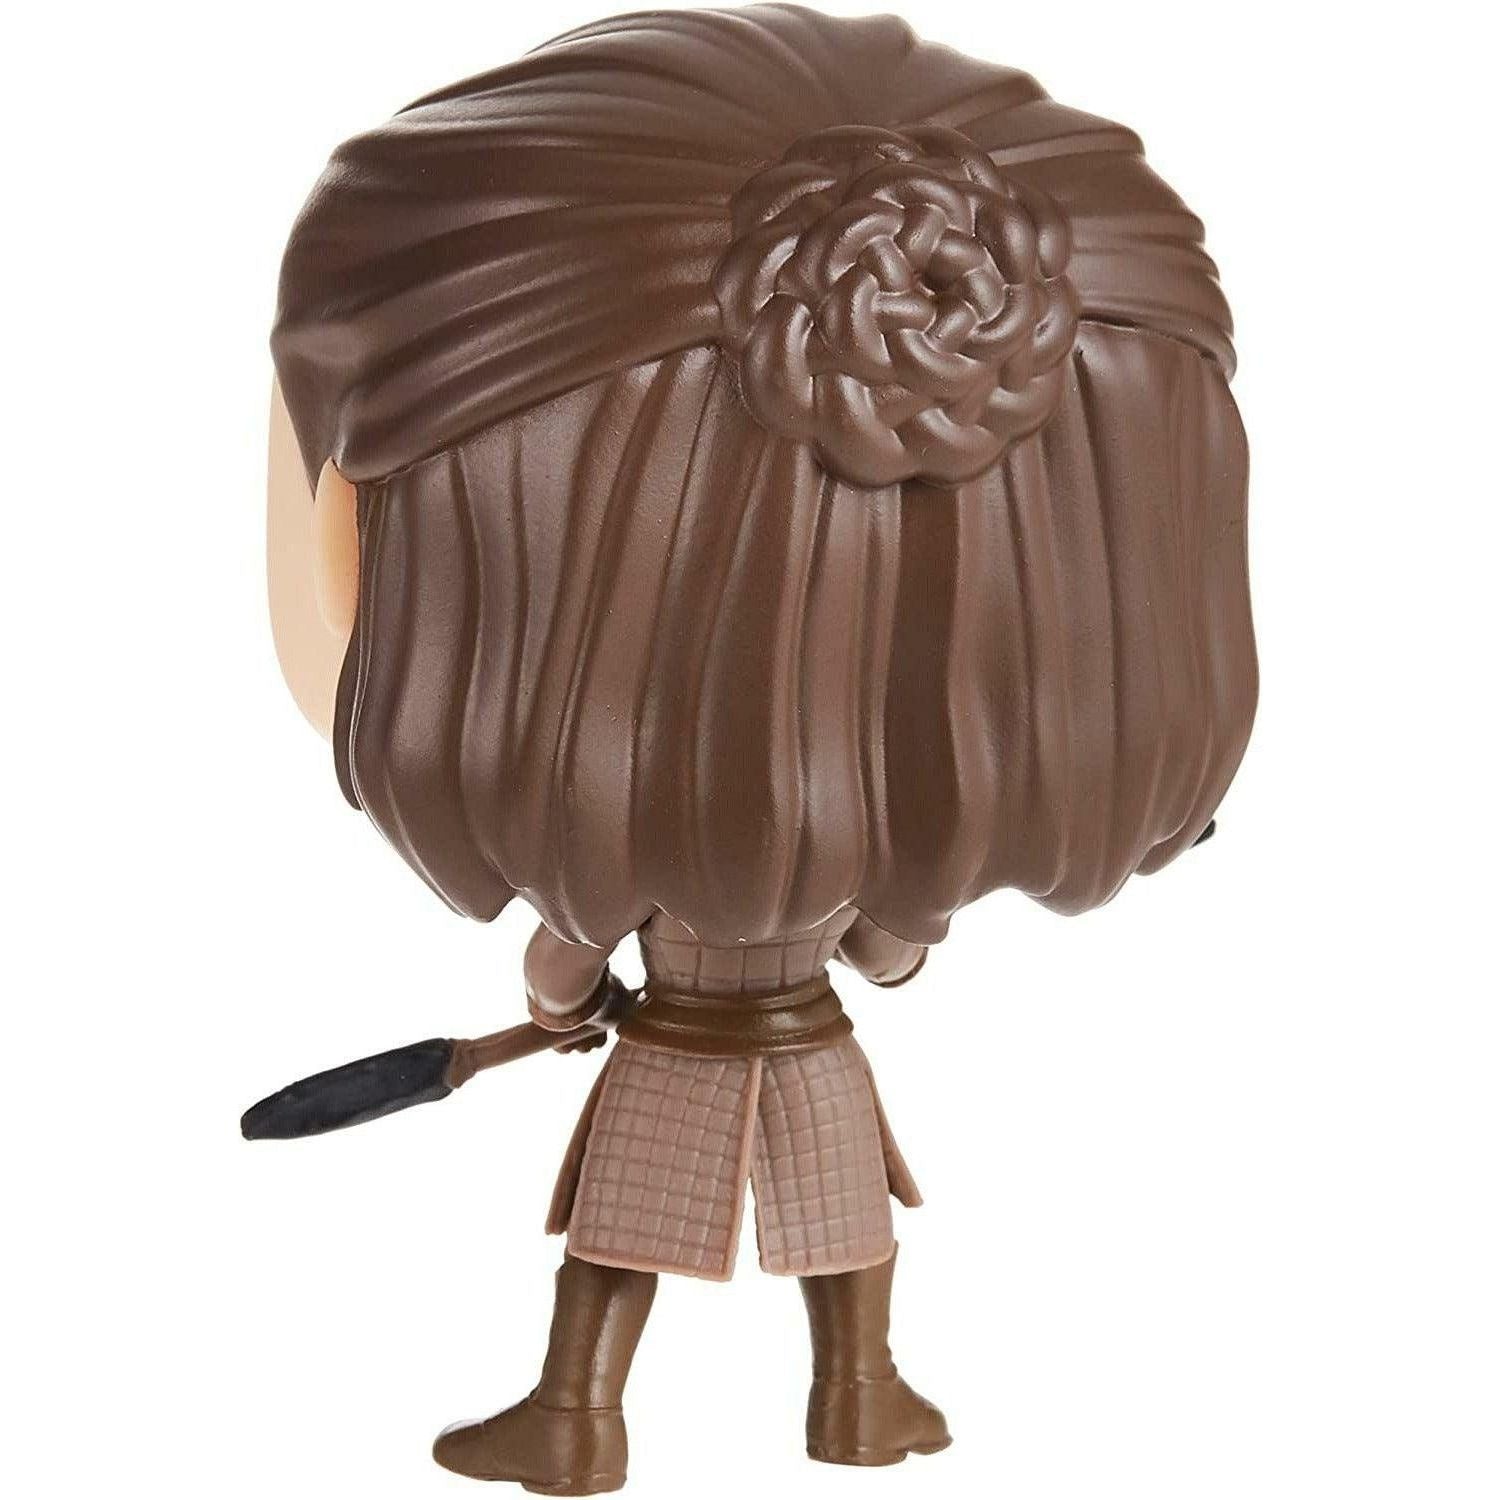 Funko POP TV Game of Thrones GOT - Arya with Two Headed Spear - BumbleToys - 18+, 5-7 Years, Boys, Fashion Dolls & Accessories, Figures, GOT, OXE, Pre-Order